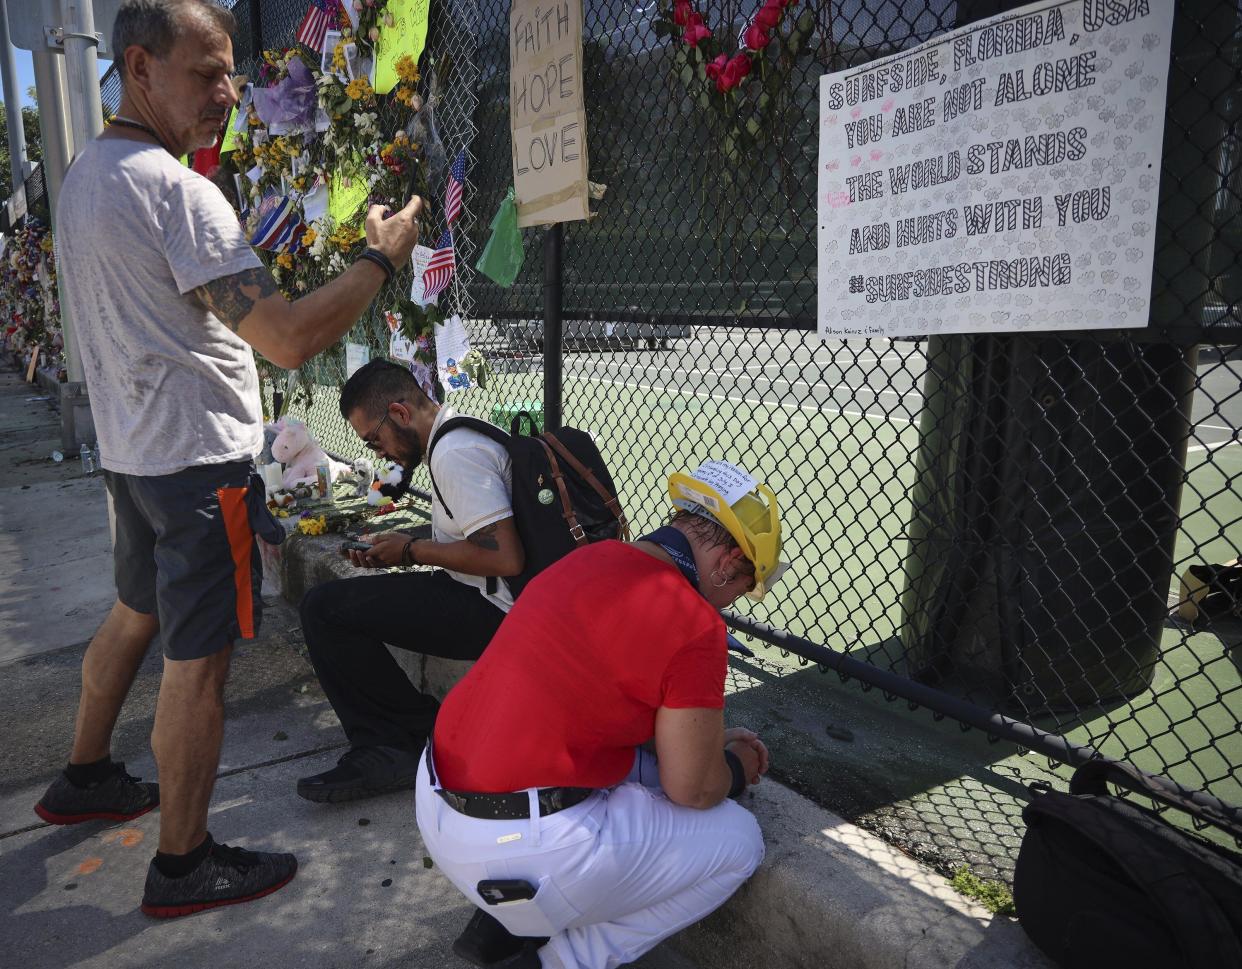 Hialeah resident Alison Kairuz, right, bows her head in prayer after pinning her hand-made sign to the fence in support of families and friends who lost love ones at the memorial site for victims of the partially collapsed South Florida condo building Champlain Towers South, in Surfside, Fla., Sunday, July 4, 2021.